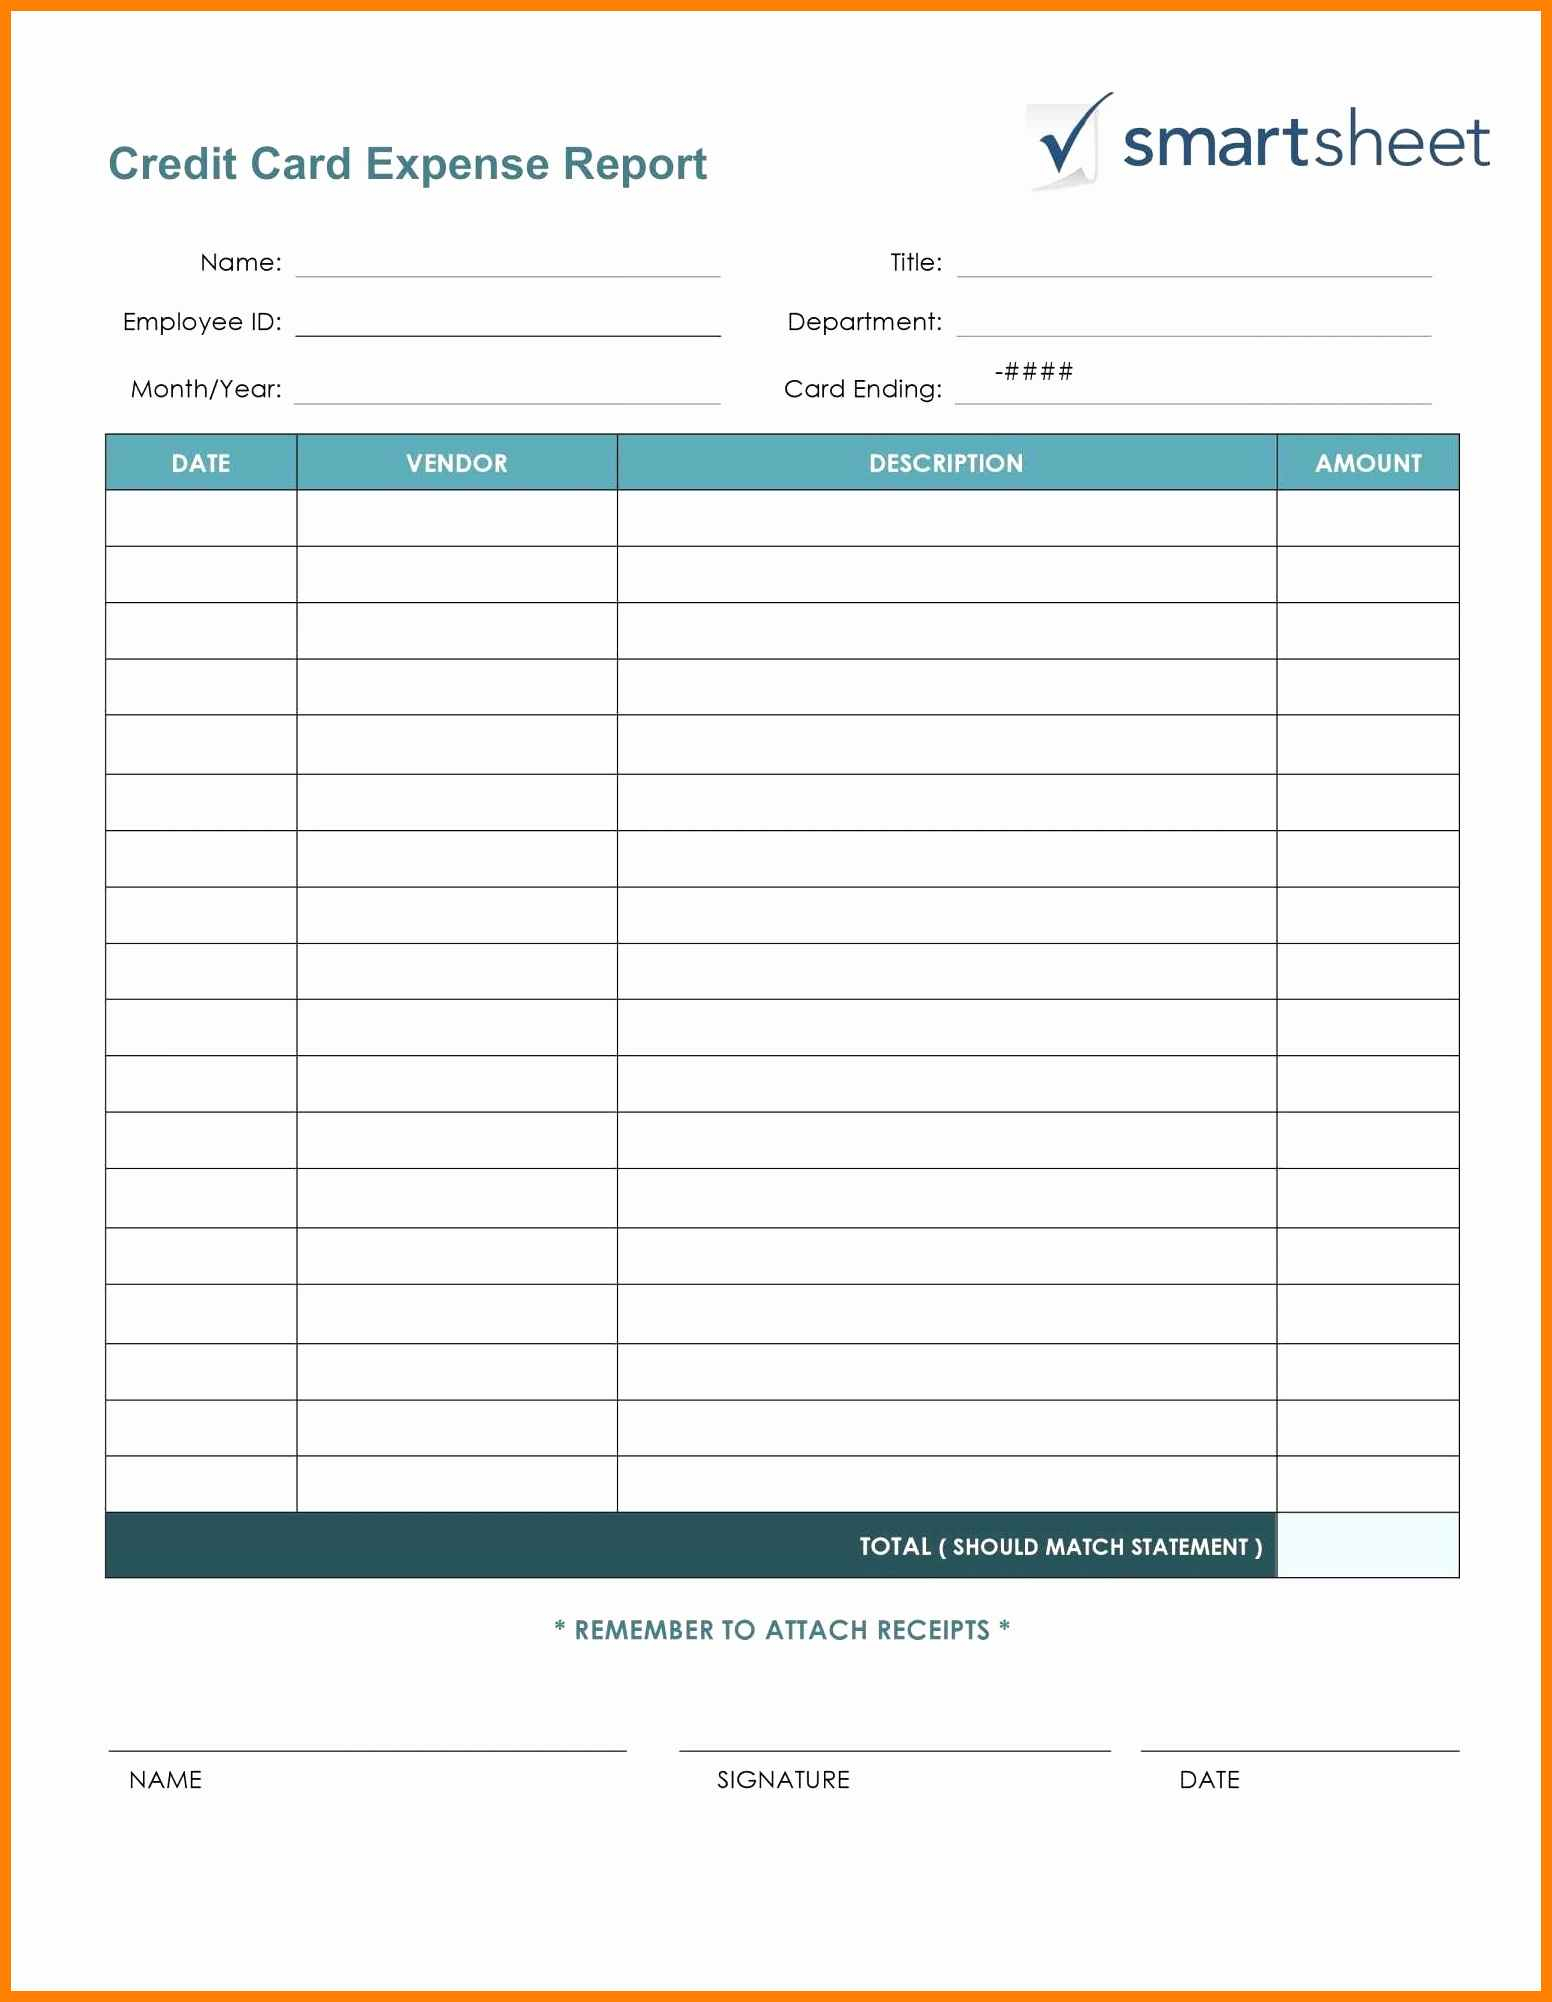 Credit Card Comparison Spreadsheet For 8+ College Spreadsheet Template  Credit Spreadsheet